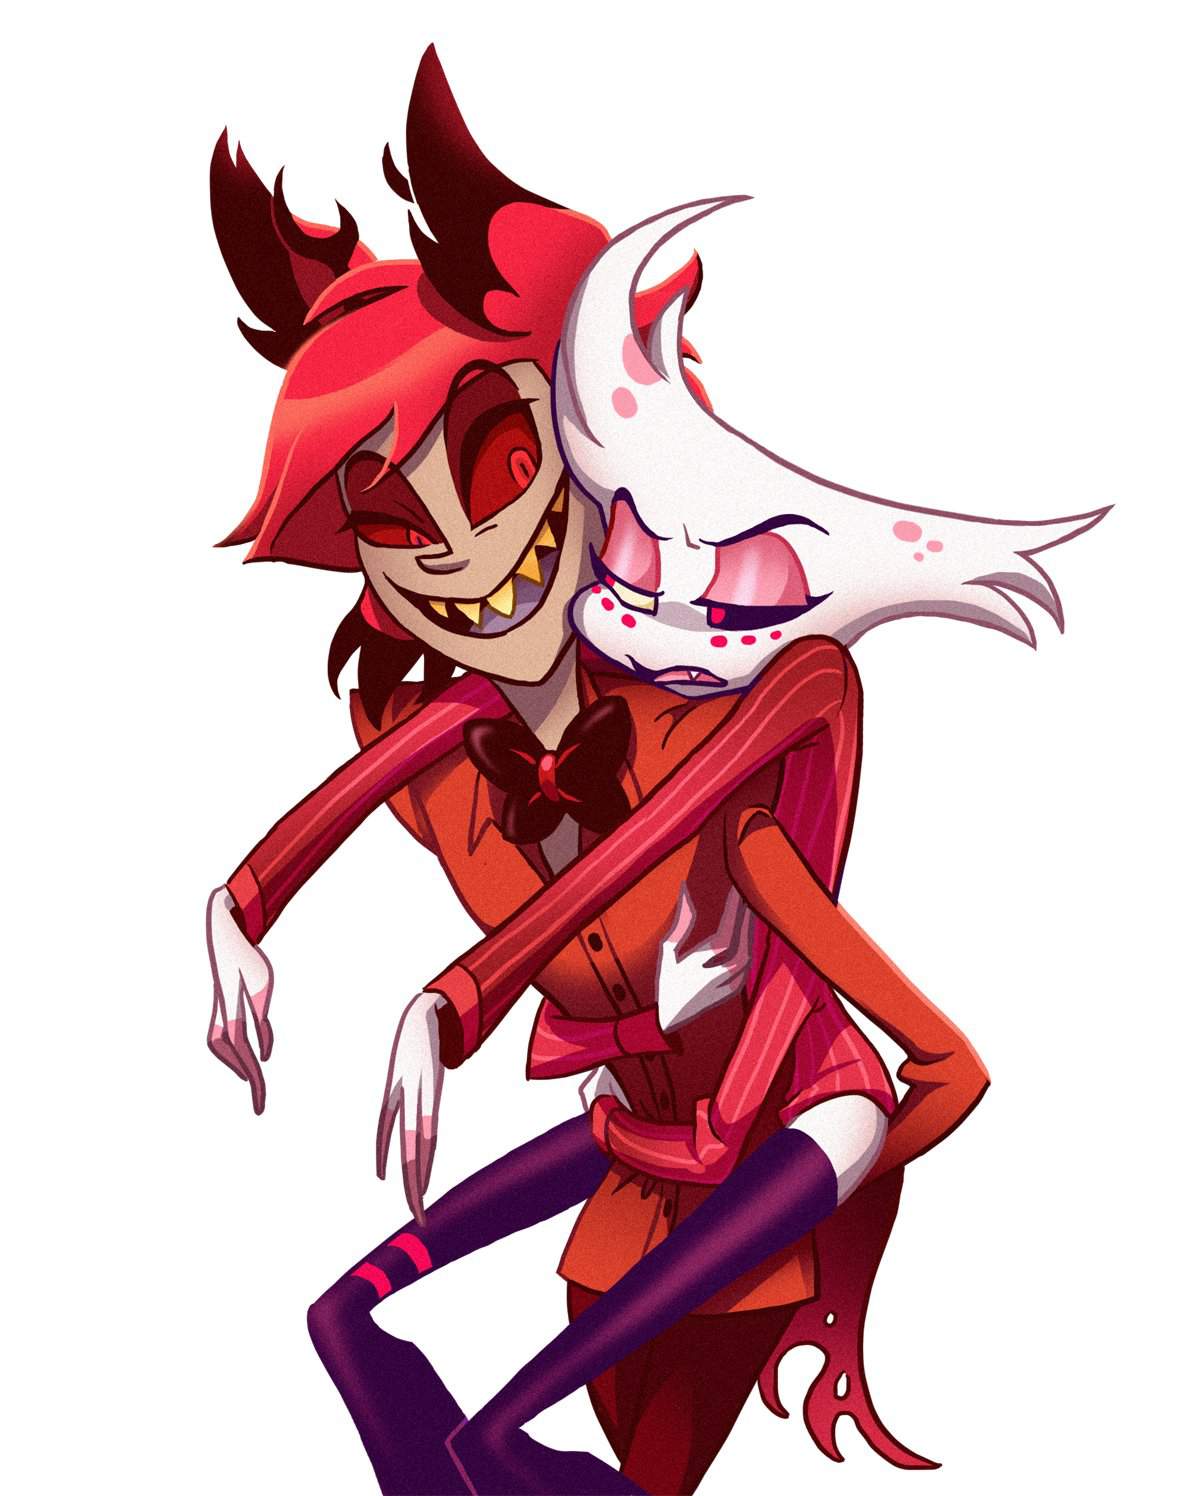 Mom, are there piggybacks in Hell? | Hazbin Hotel (official) Amino